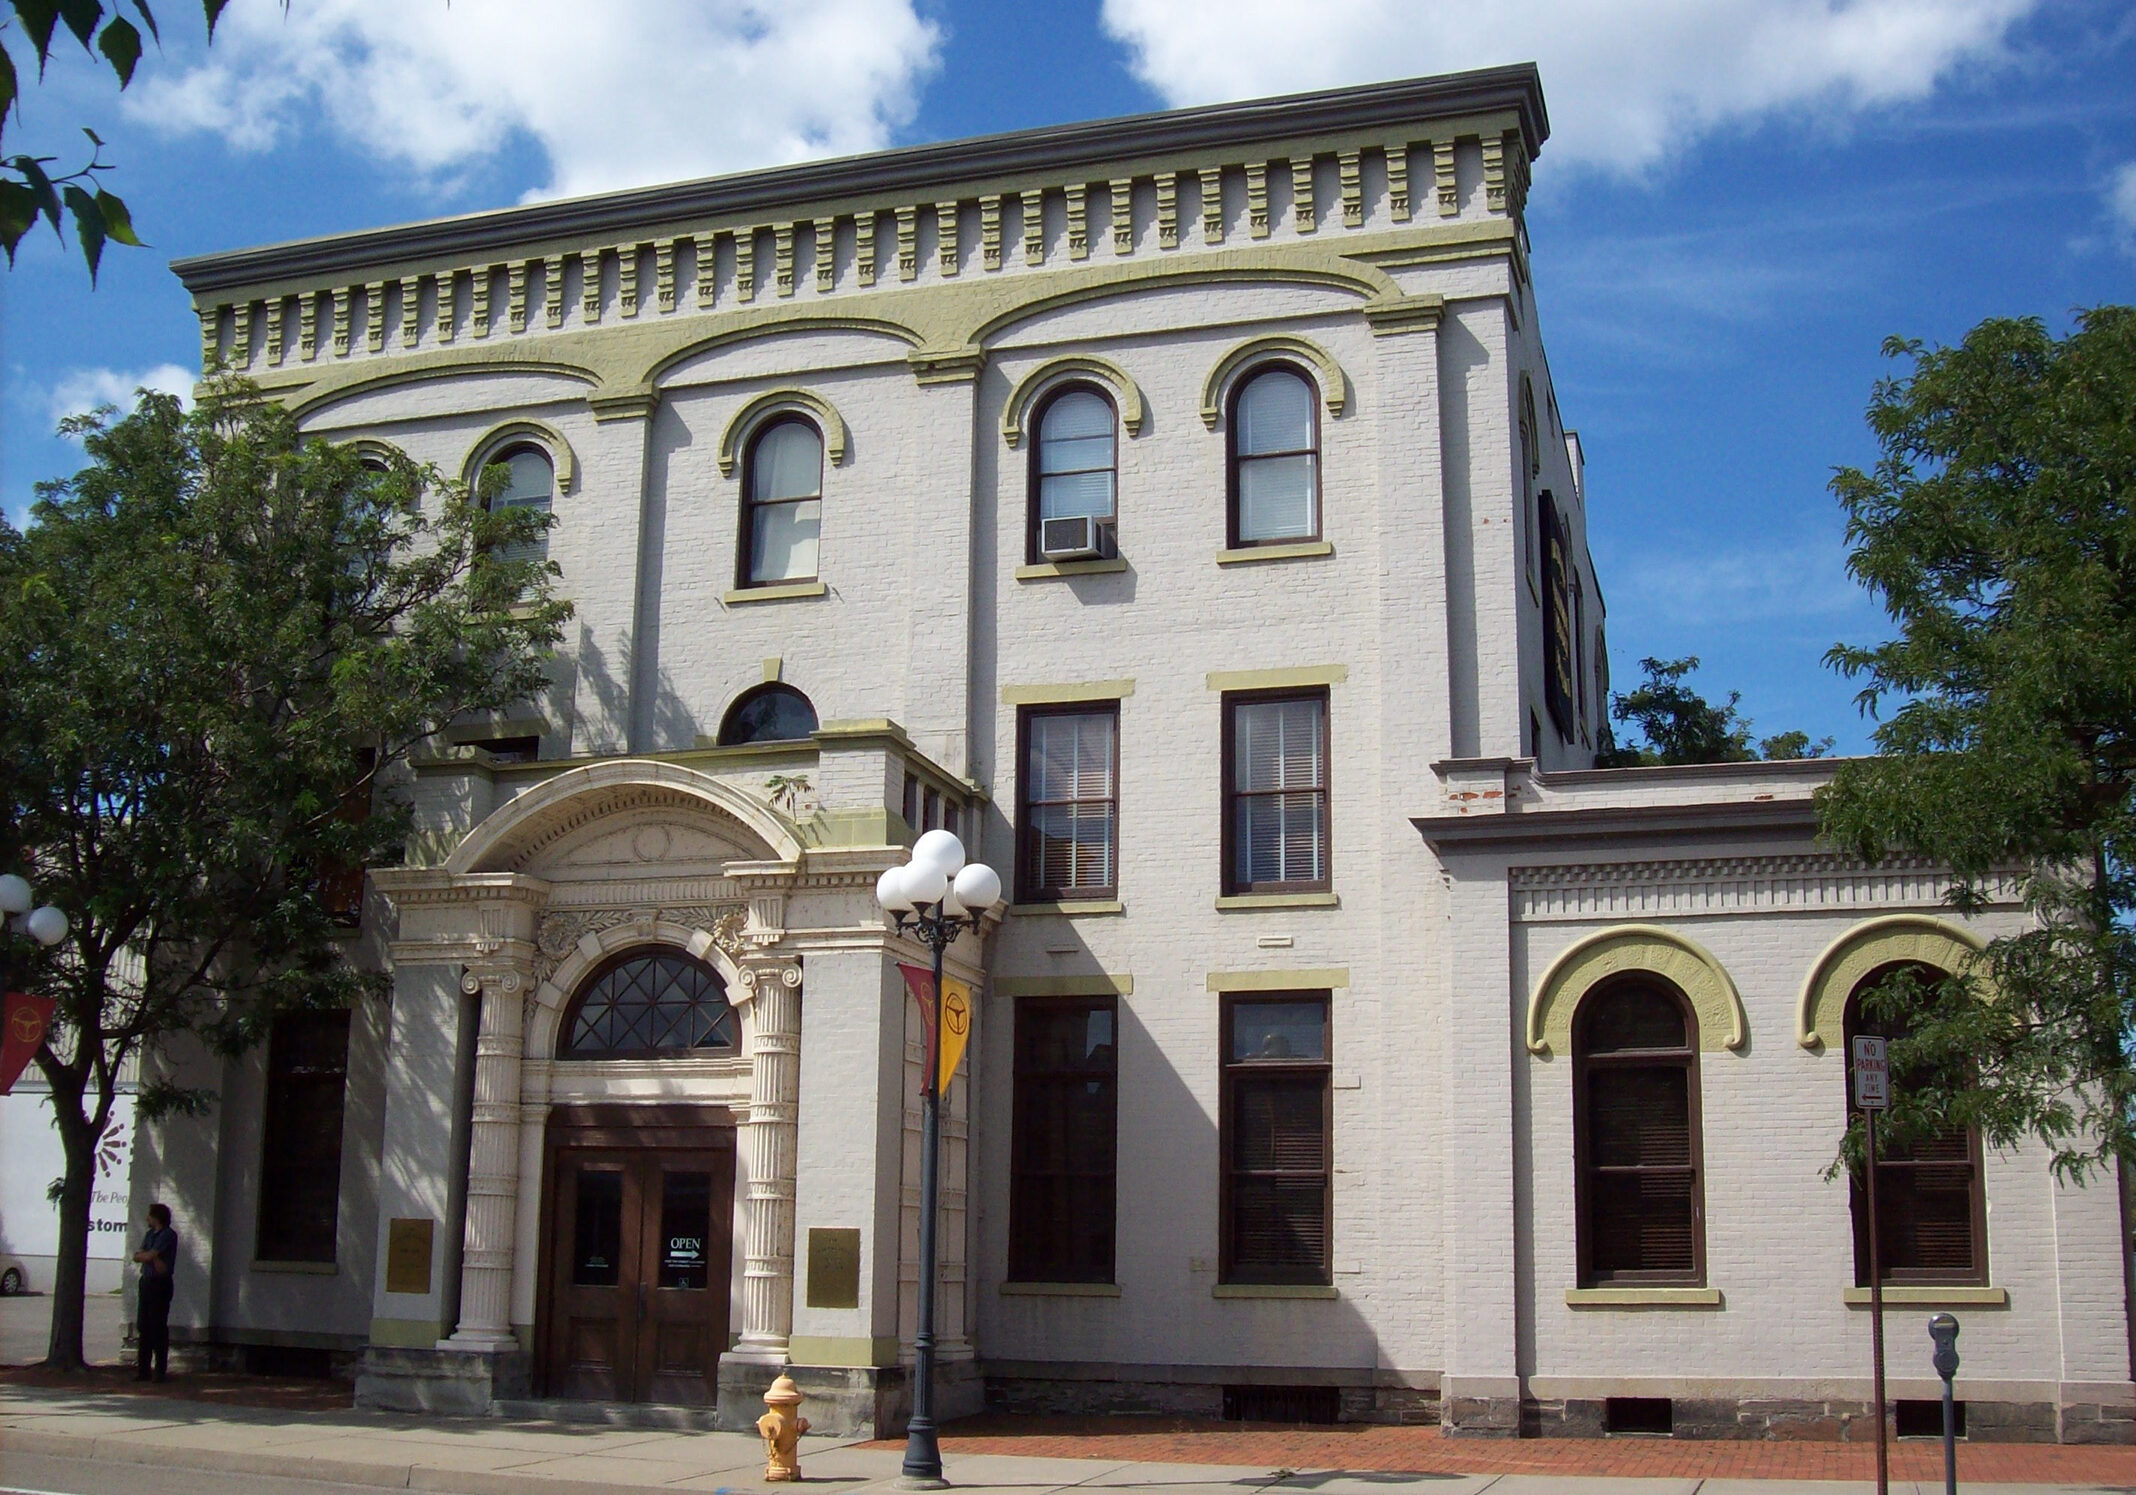 Exterior of the Chemung County Historical Society